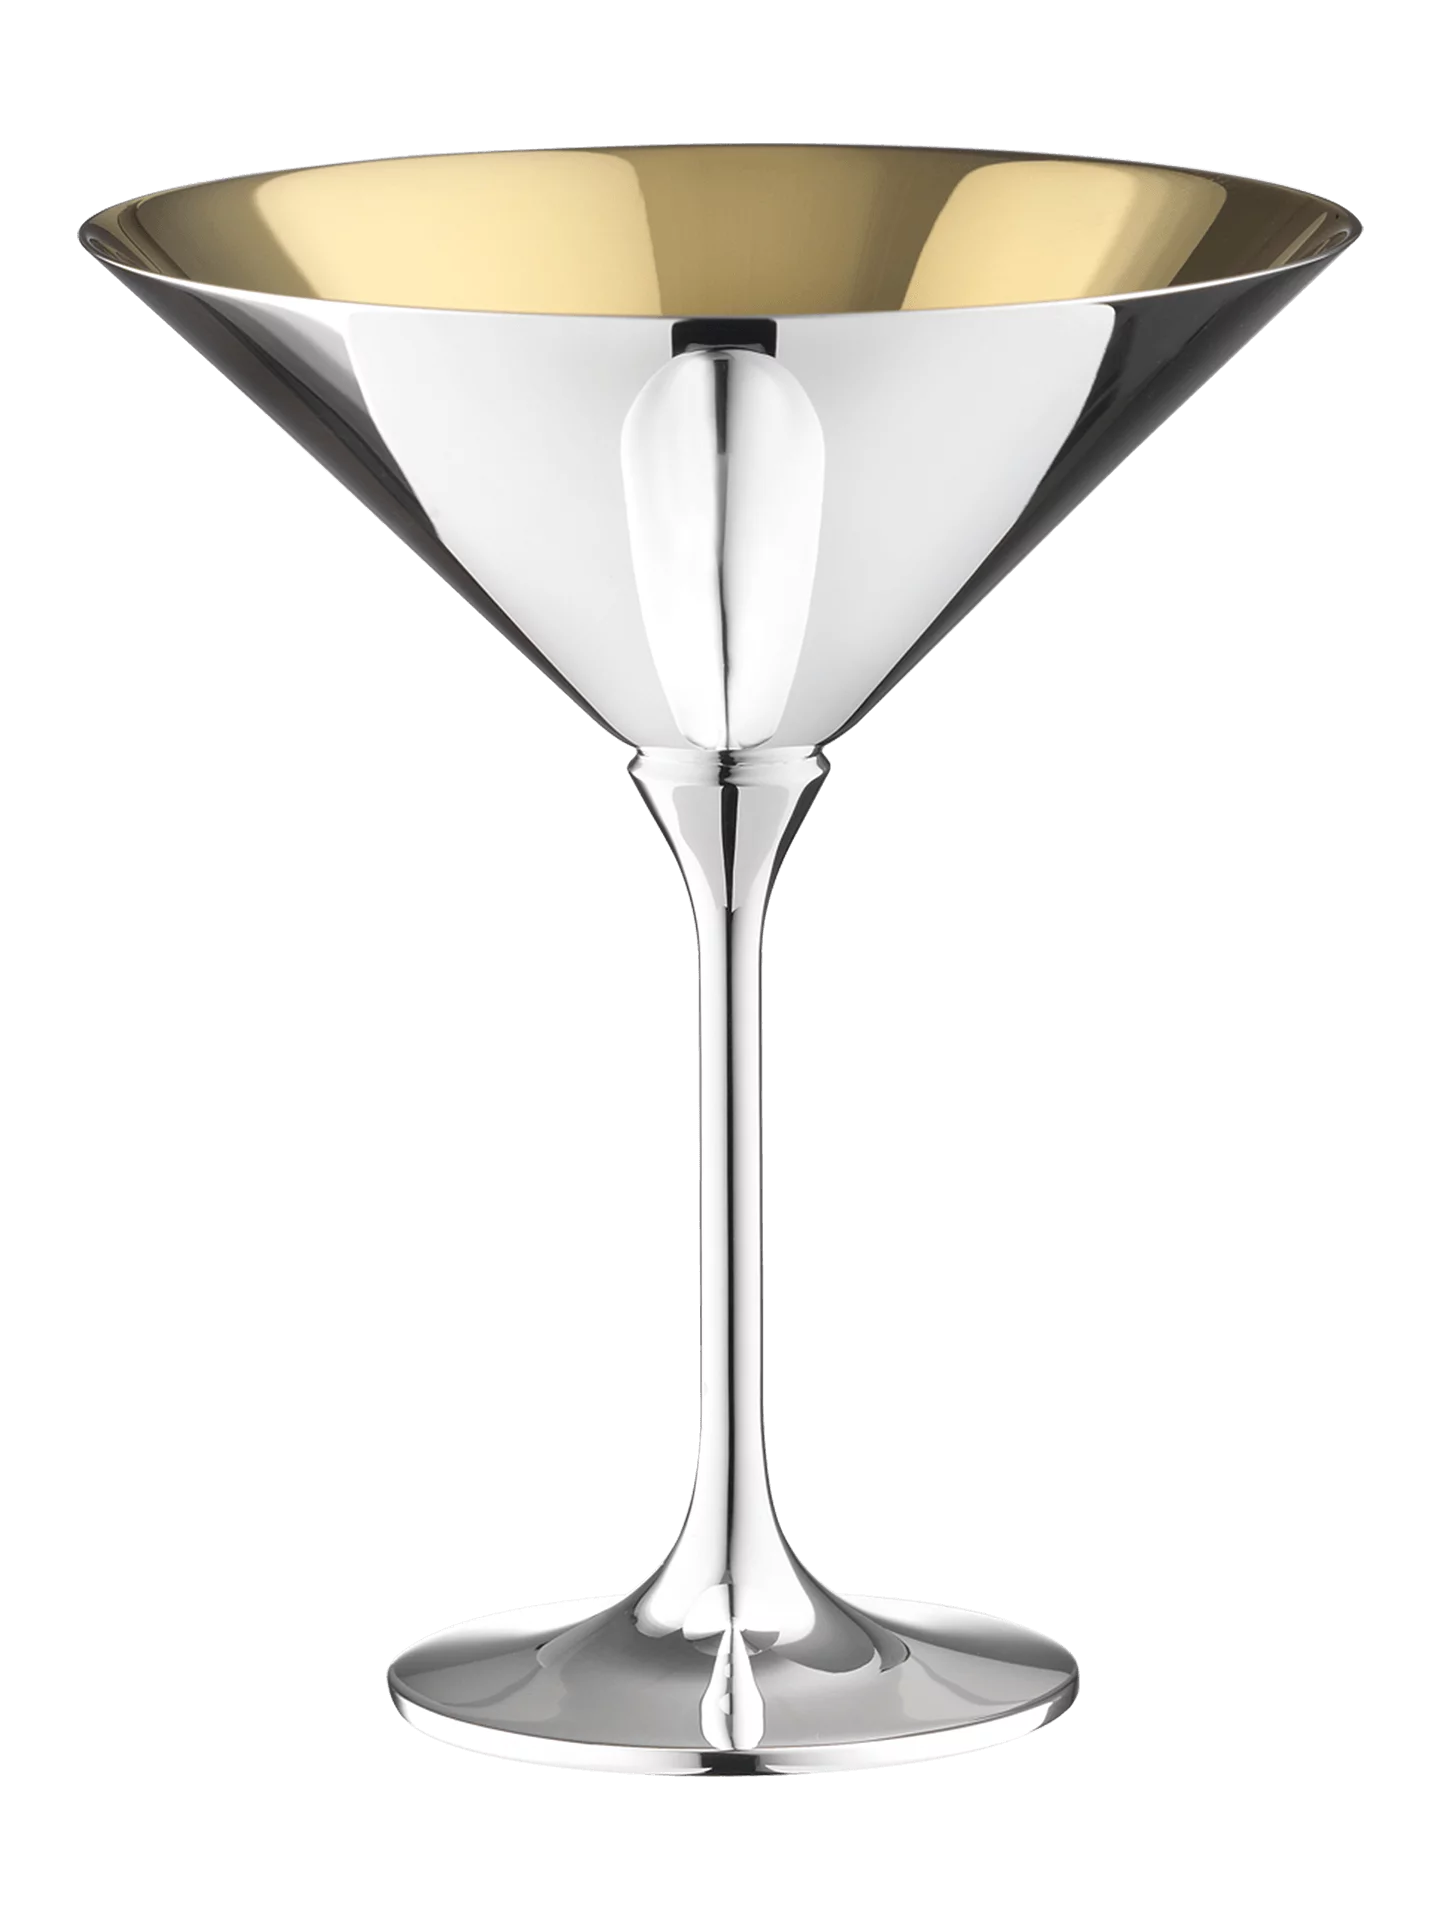 Dante Cocktail coupe, inside gold (90g silverplated, gold-plated inside)